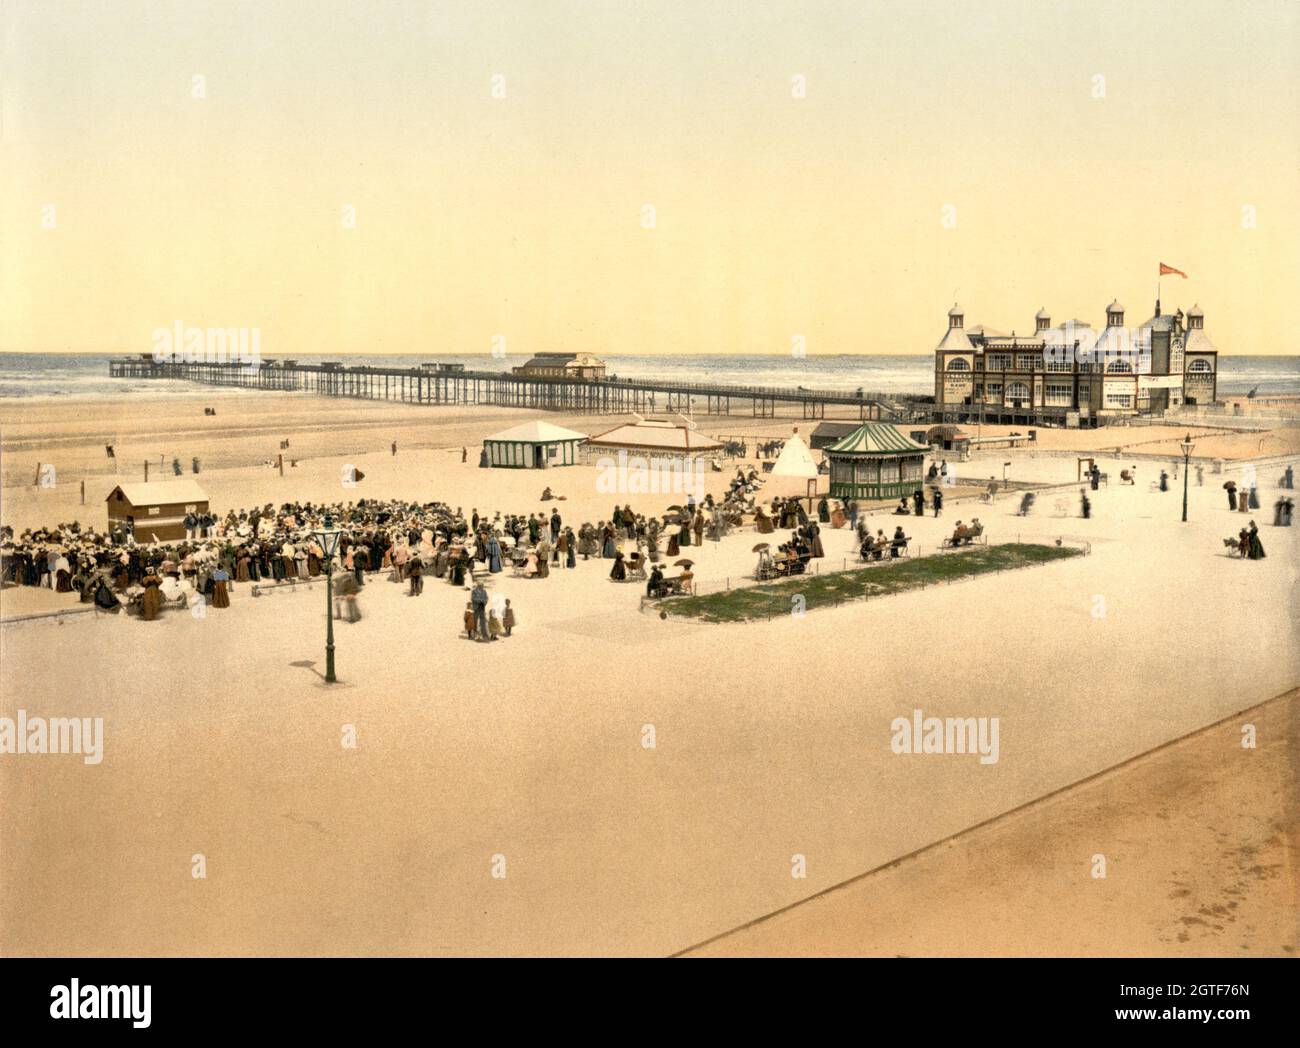 Vintage colour photo circa 1900 of the original Rhyl Victoria Pier and Grand Pavilion on the North Wales coast. The pleasure pier was opened was in August 1867 and was the first pier in North Wales.   The Grand Pavilion was opened in 1891.  The pier was demolished in March 1973 Stock Photo